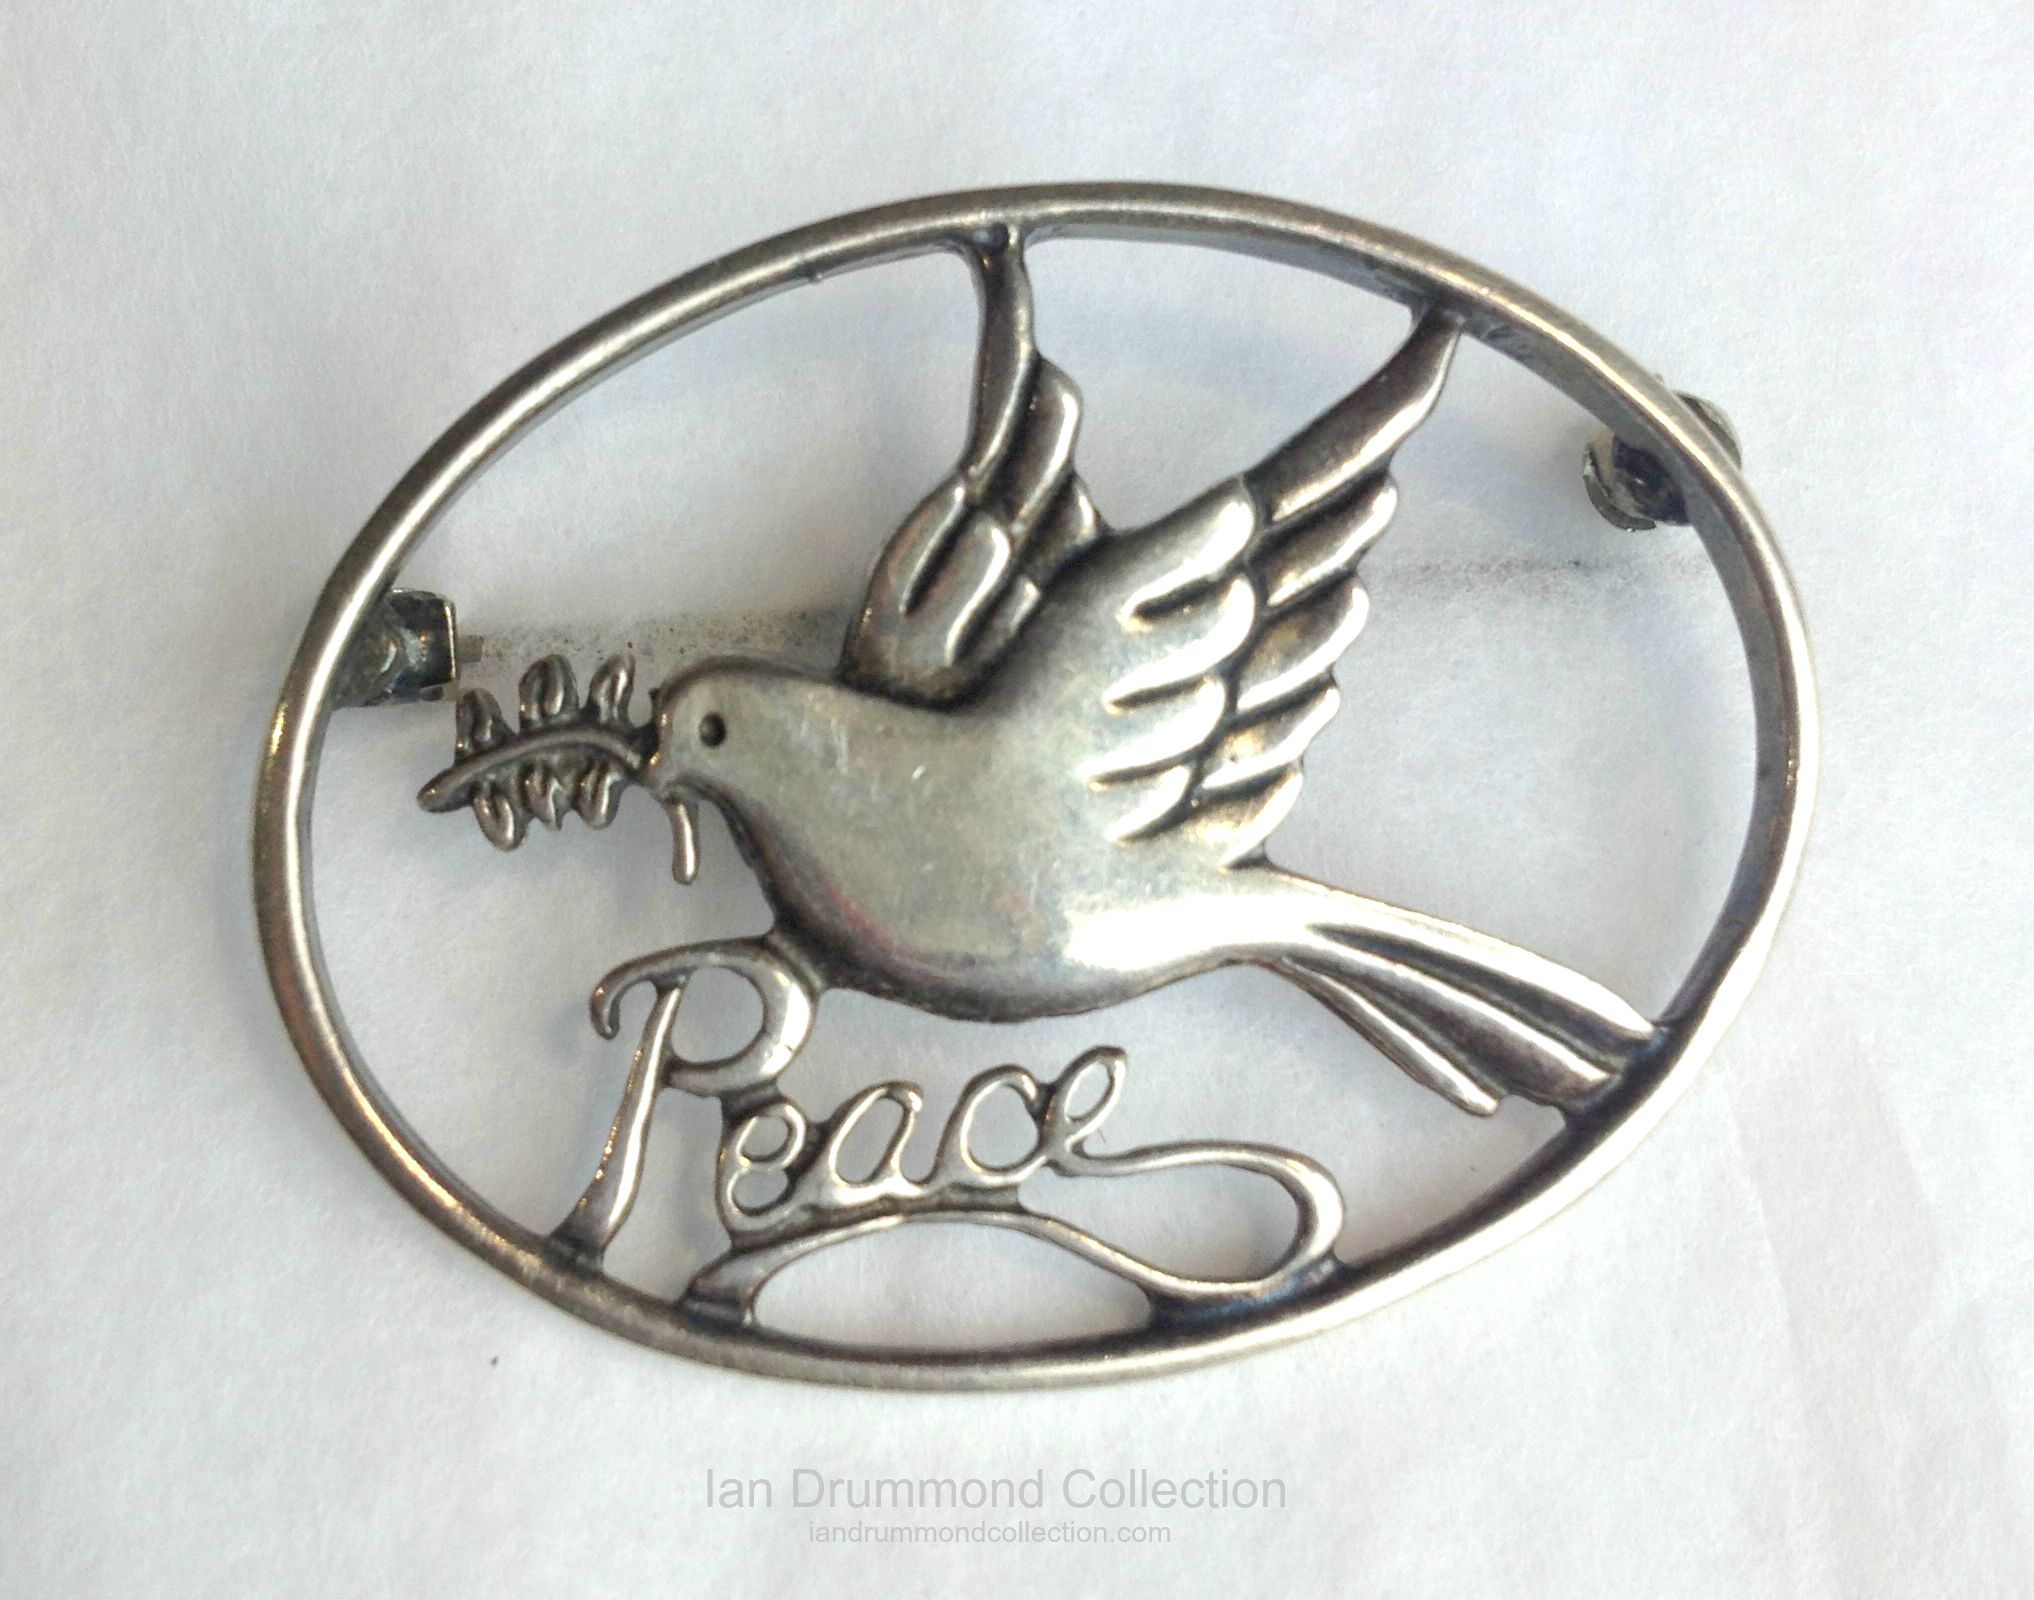 Ian Drummond Collection Toronto Vintage Clothing Show Sterling Peace Pin